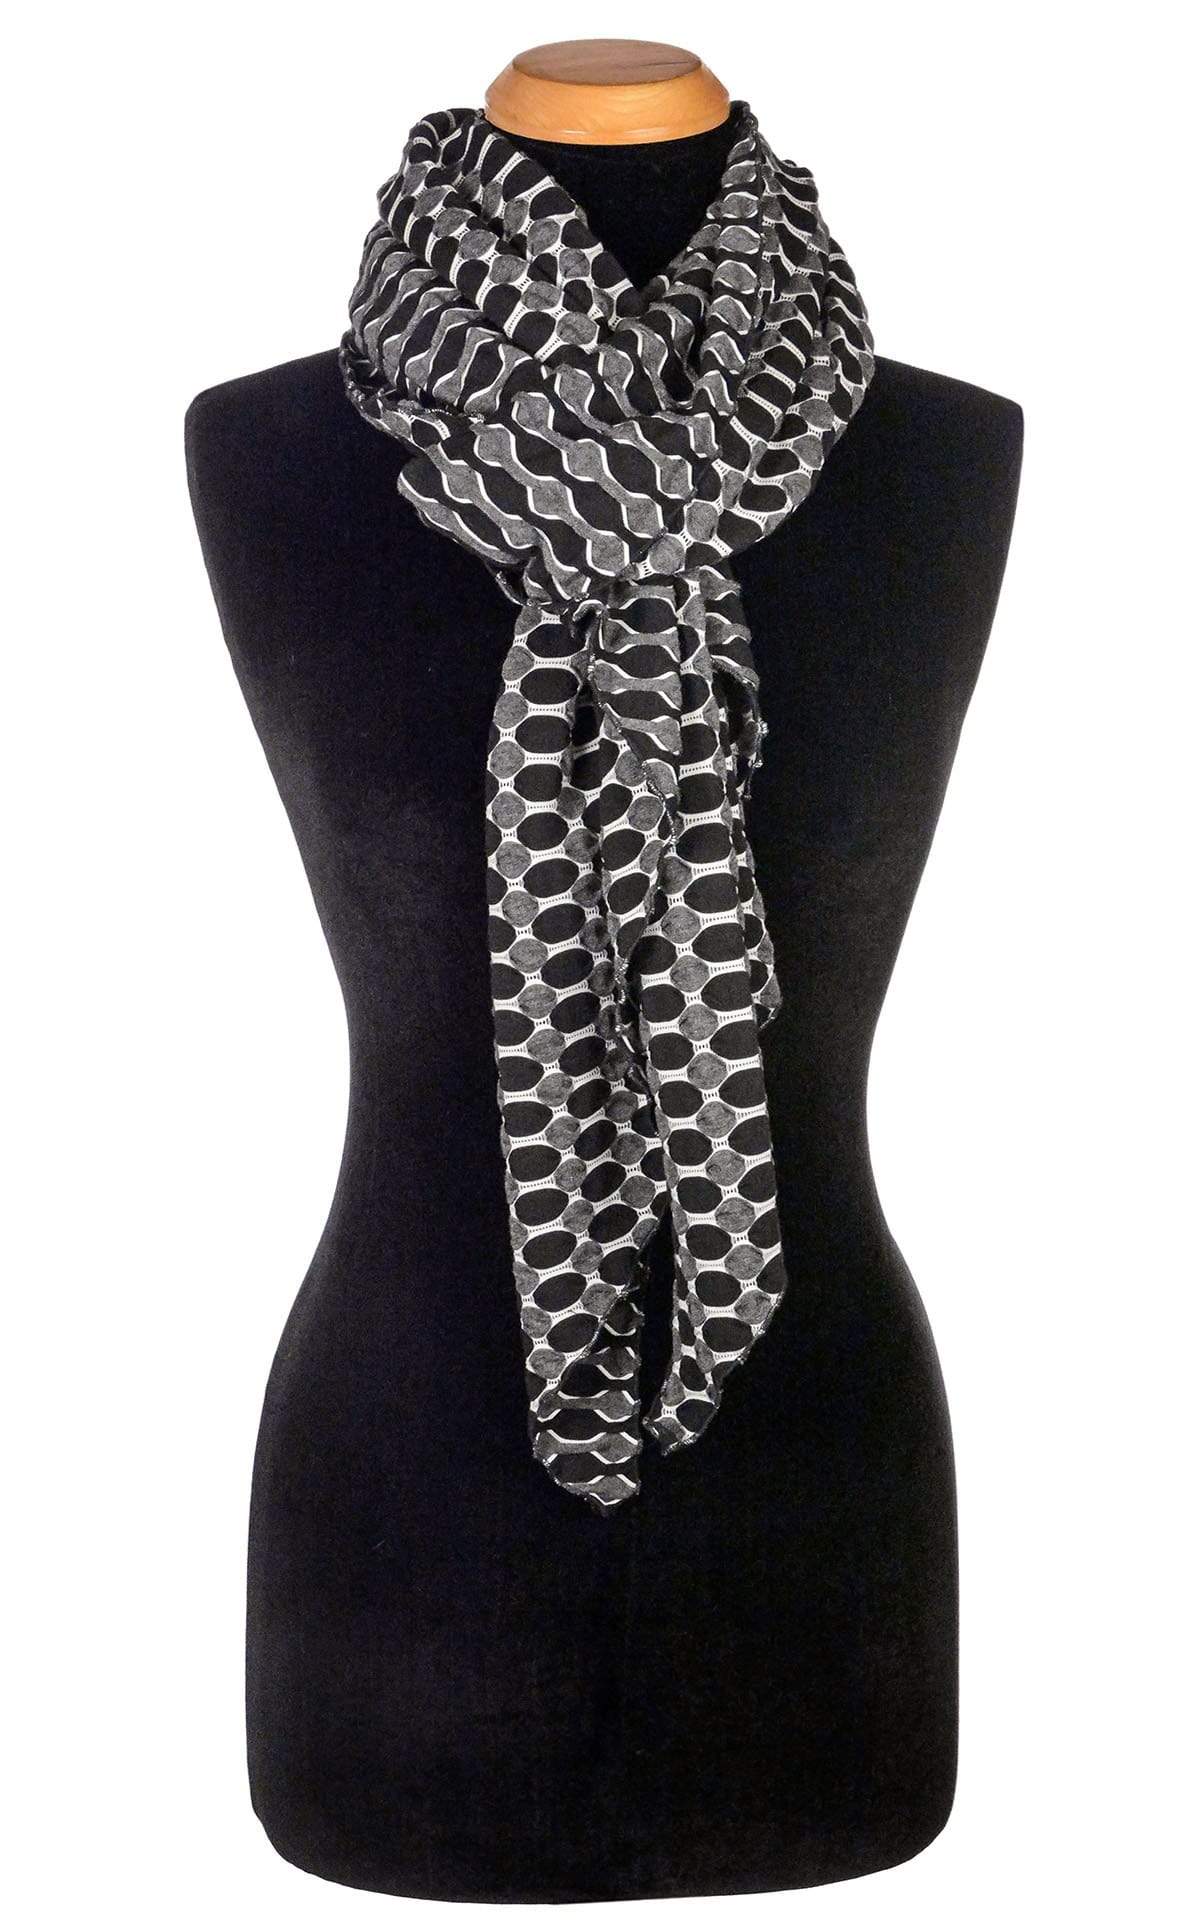 Women’s  Large Handkerchief Scarf, Wrap on Mannequin | Lunar and Solar Eclipse, black knit with white lattice patterning exposing sections of gray and white| Handmade in Seattle WA | Pandemonium Millinery